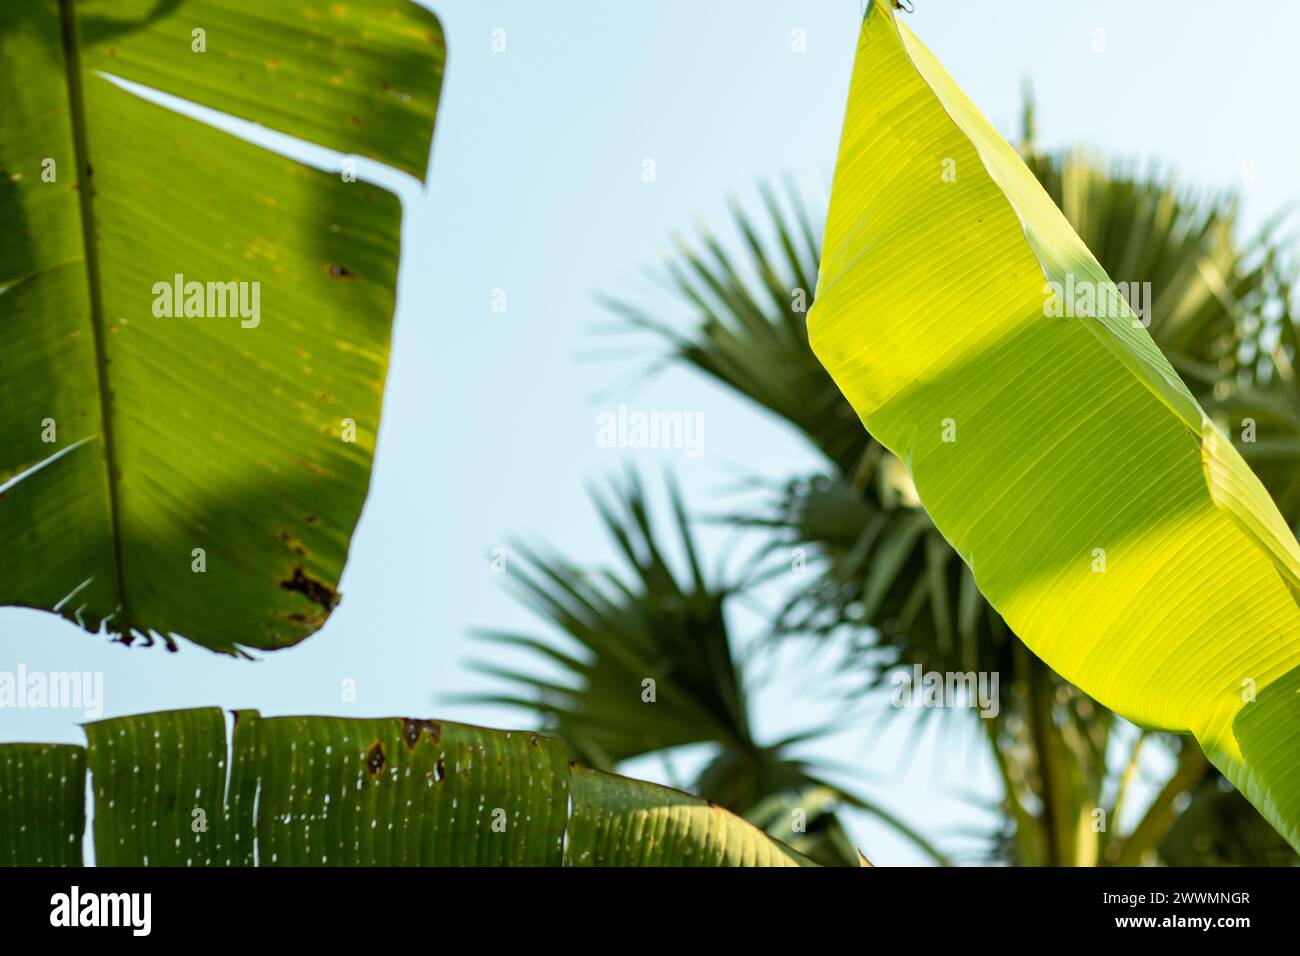 Banana leaves are large, flexible, and waterproof leaves that come from the banana plant. The banana leaf is the leaf of the banana plant, which may p Stock Photo